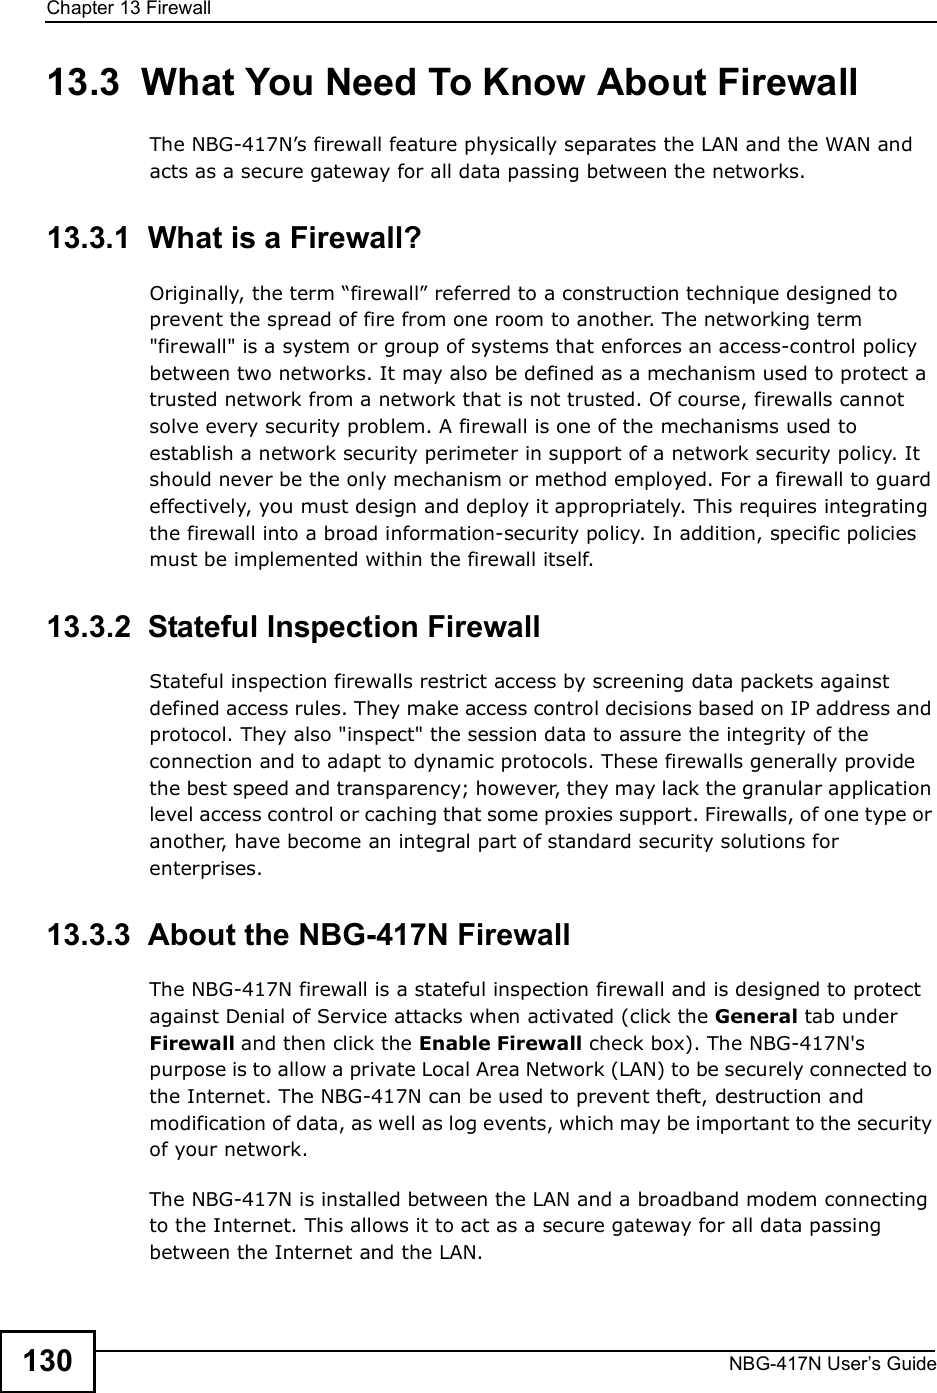 Chapter 13FirewallNBG-417N User s Guide13013.3  What You Need To Know About FirewallThe NBG-417N!s firewall feature physically separates the LAN and the WAN and acts as a secure gateway for all data passing between the networks.13.3.1  What is a Firewall?Originally, the term &quot;firewall# referred to a construction technique designed to prevent the spread of fire from one room to another. The networking term &quot;firewall&quot; is a system or group of systems that enforces an access-control policy between two networks. It may also be defined as a mechanism used to protect a trusted network from a network that is not trusted. Of course, firewalls cannot solve every security problem. A firewall is one of the mechanisms used to establish a network security perimeter in support of a network security policy. It should never be the only mechanism or method employed. For a firewall to guard effectively, you must design and deploy it appropriately. This requires integrating the firewall into a broad information-security policy. In addition, specific policies must be implemented within the firewall itself. 13.3.2  Stateful Inspection Firewall Stateful inspection firewalls restrict access by screening data packets against defined access rules. They make access control decisions based on IP address and protocol. They also &quot;inspect&quot; the session data to assure the integrity of the connection and to adapt to dynamic protocols. These firewalls generally provide the best speed and transparency; however, they may lack the granular application level access control or caching that some proxies support. Firewalls, of one type or another, have become an integral part of standard security solutions for enterprises.13.3.3  About the NBG-417N FirewallThe NBG-417N firewall is a stateful inspection firewall and is designed to protect against Denial of Service attacks when activated (click the General tab under Firewall and then click the Enable Firewall check box). The NBG-417N&apos;s purpose is to allow a private Local Area Network (LAN) to be securely connected to the Internet. The NBG-417N can be used to prevent theft, destruction and modification of data, as well as log events, which may be important to the security of your network. The NBG-417N is installed between the LAN and a broadband modem connecting to the Internet. This allows it to act as a secure gateway for all data passing between the Internet and the LAN.